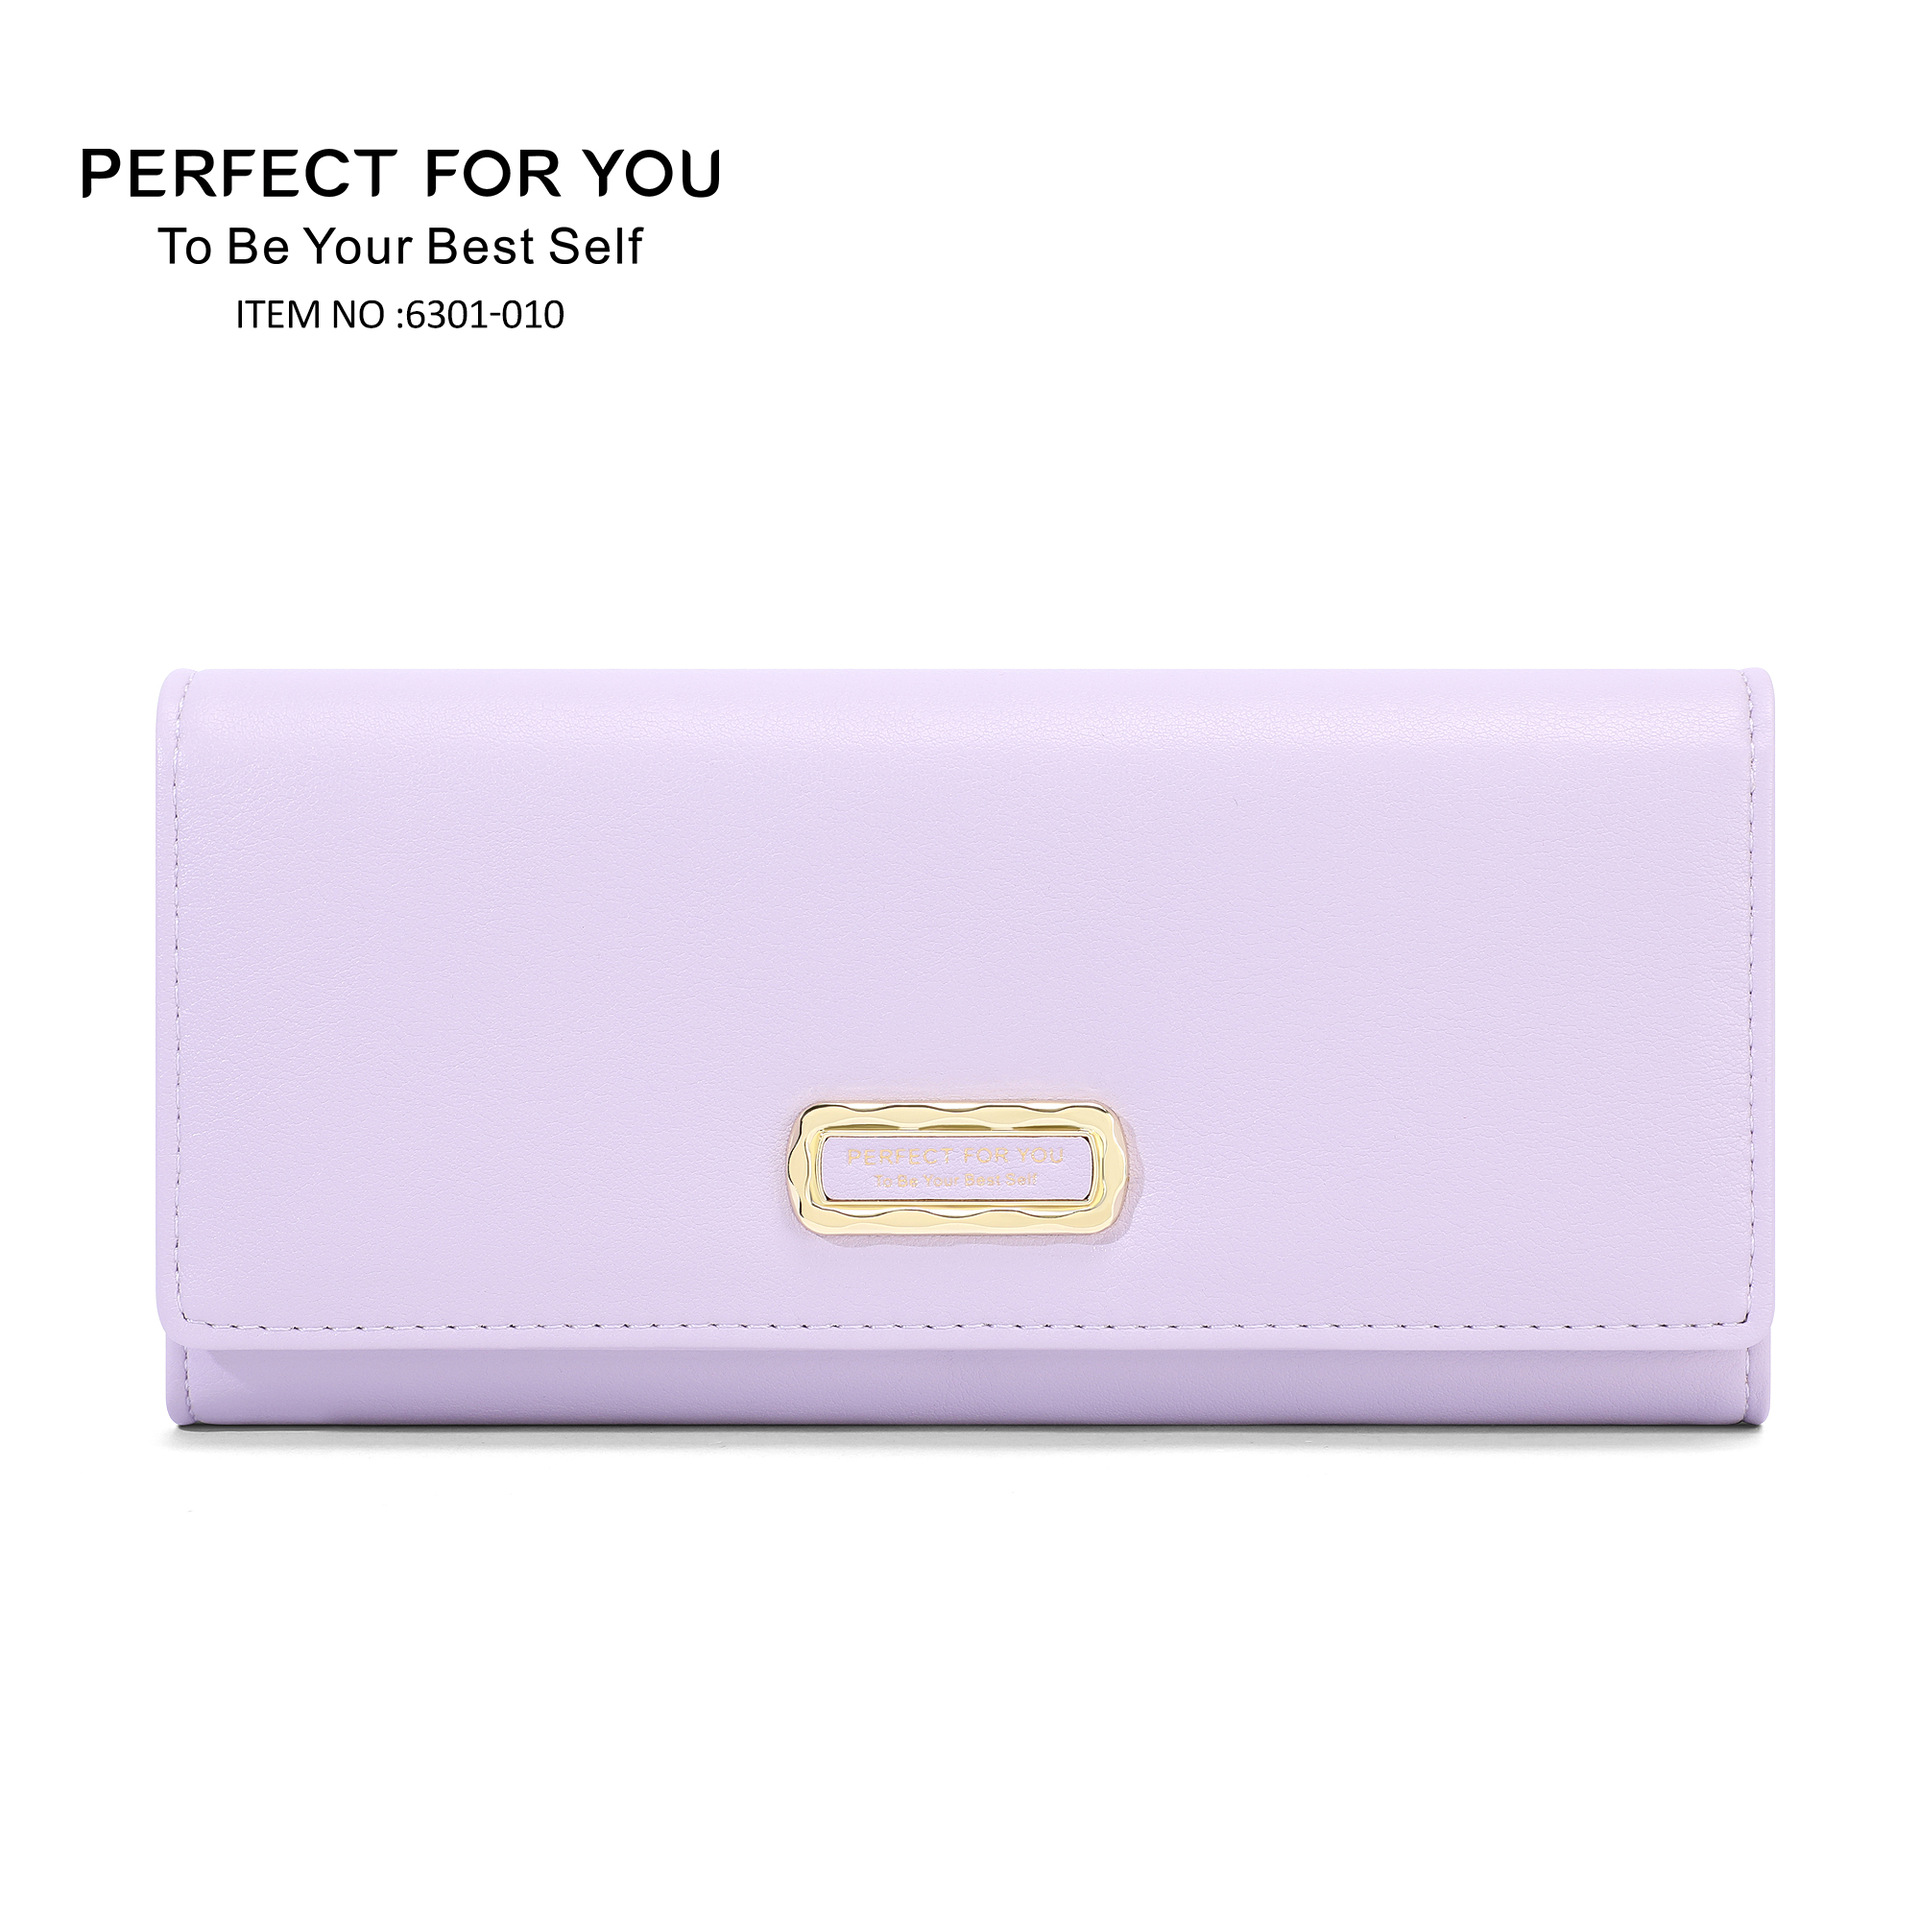 Perfect for You New Ladies' Purse Long and Simple Pu Advanced Sense Coin Purse Tri-Fold Clutch